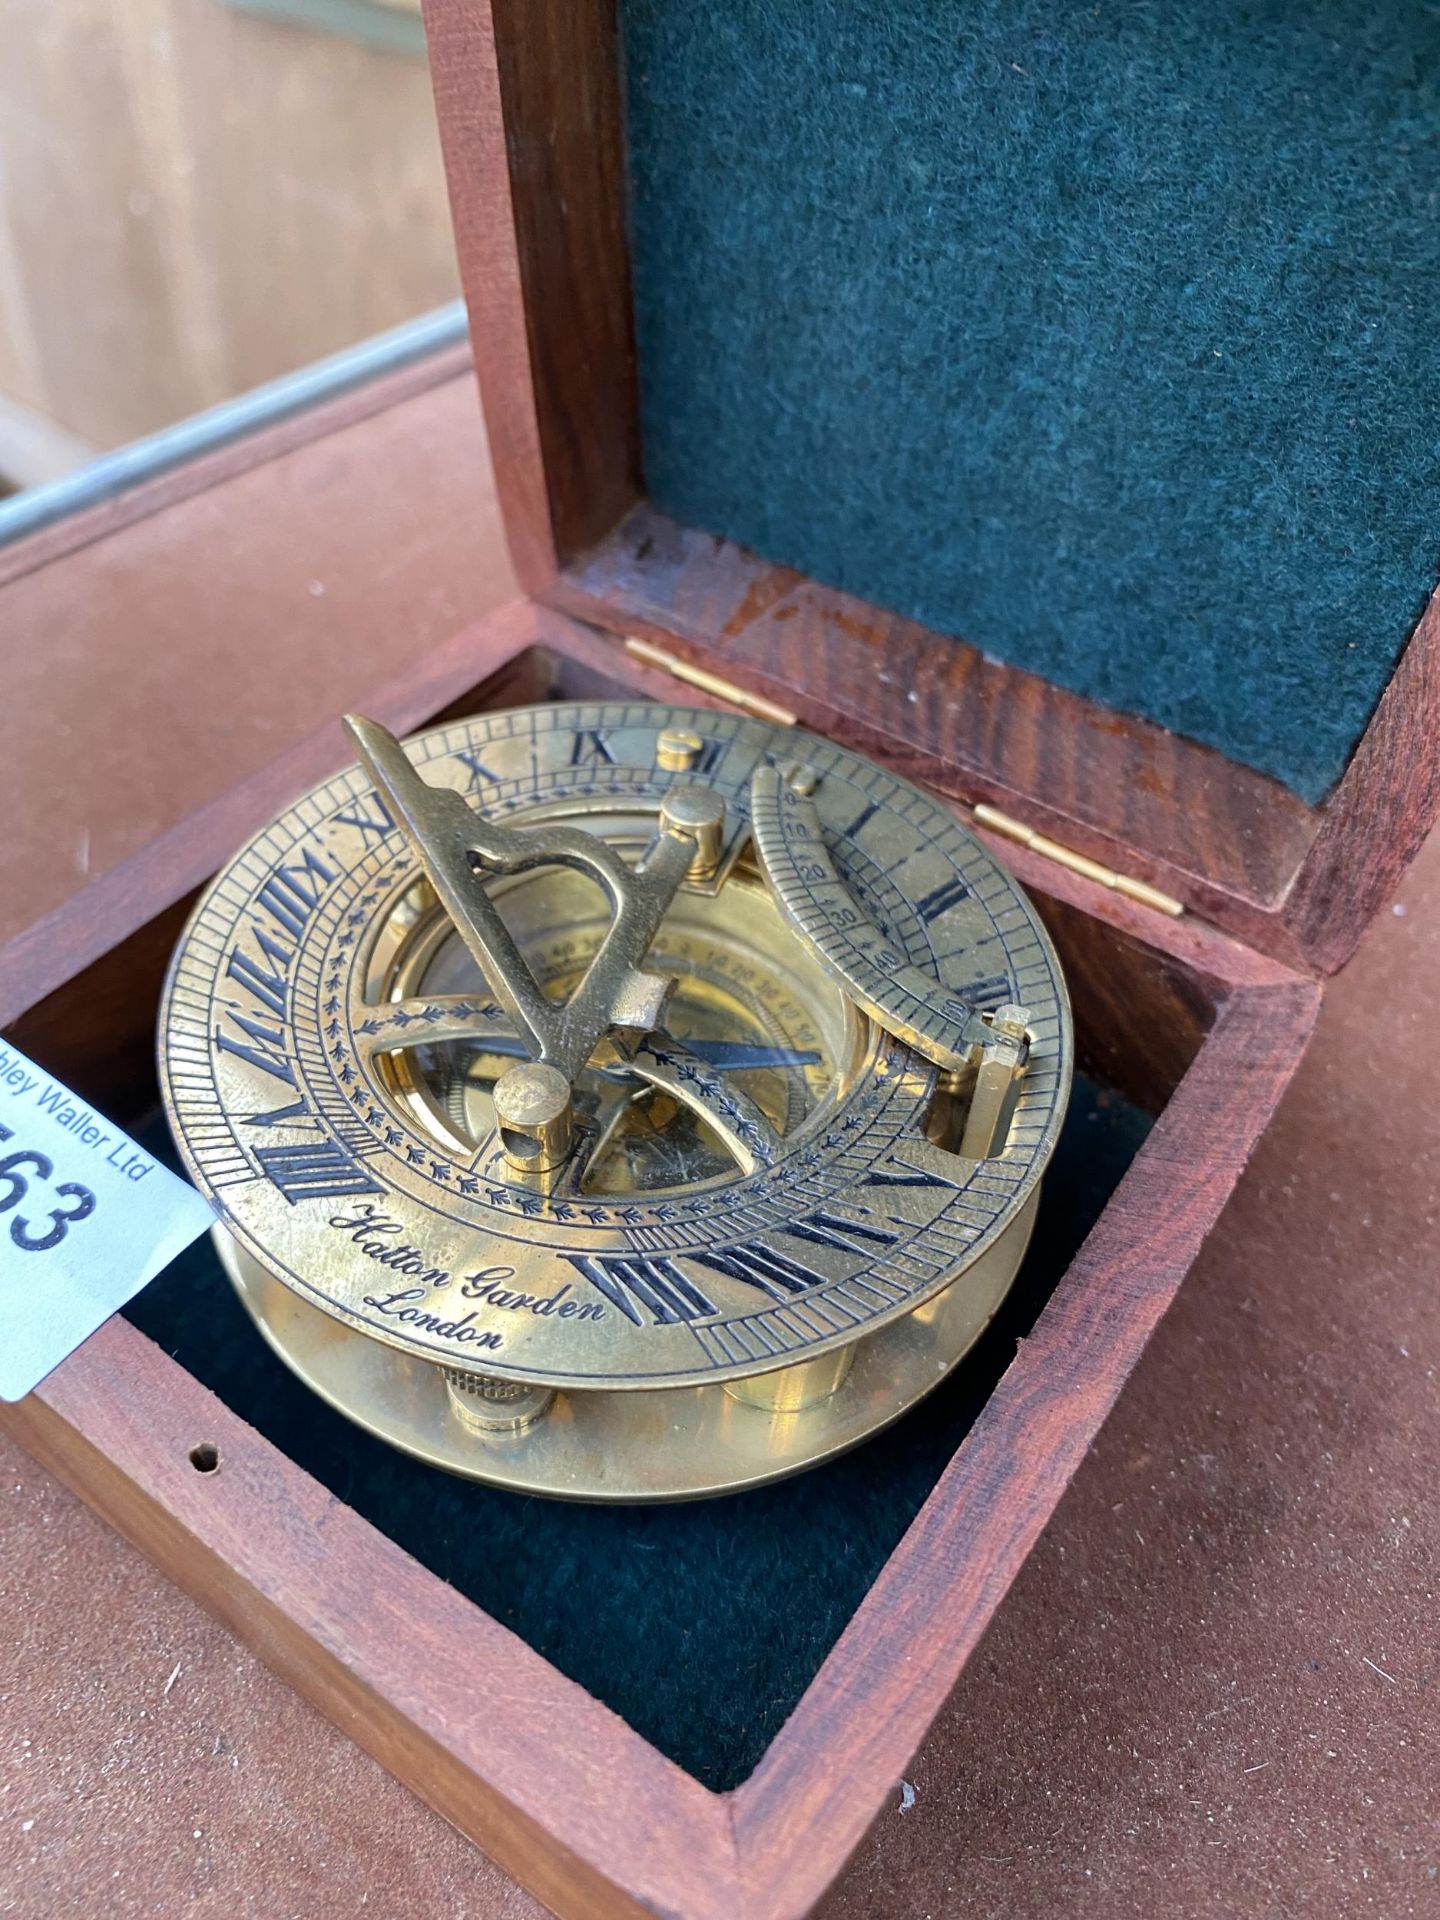 A VINTAGE BRASSS COMPASS BEARING THE STAMP' HATTON GARDEN LONDON' COMPLETE WITH WOODEN CASE - Image 2 of 3